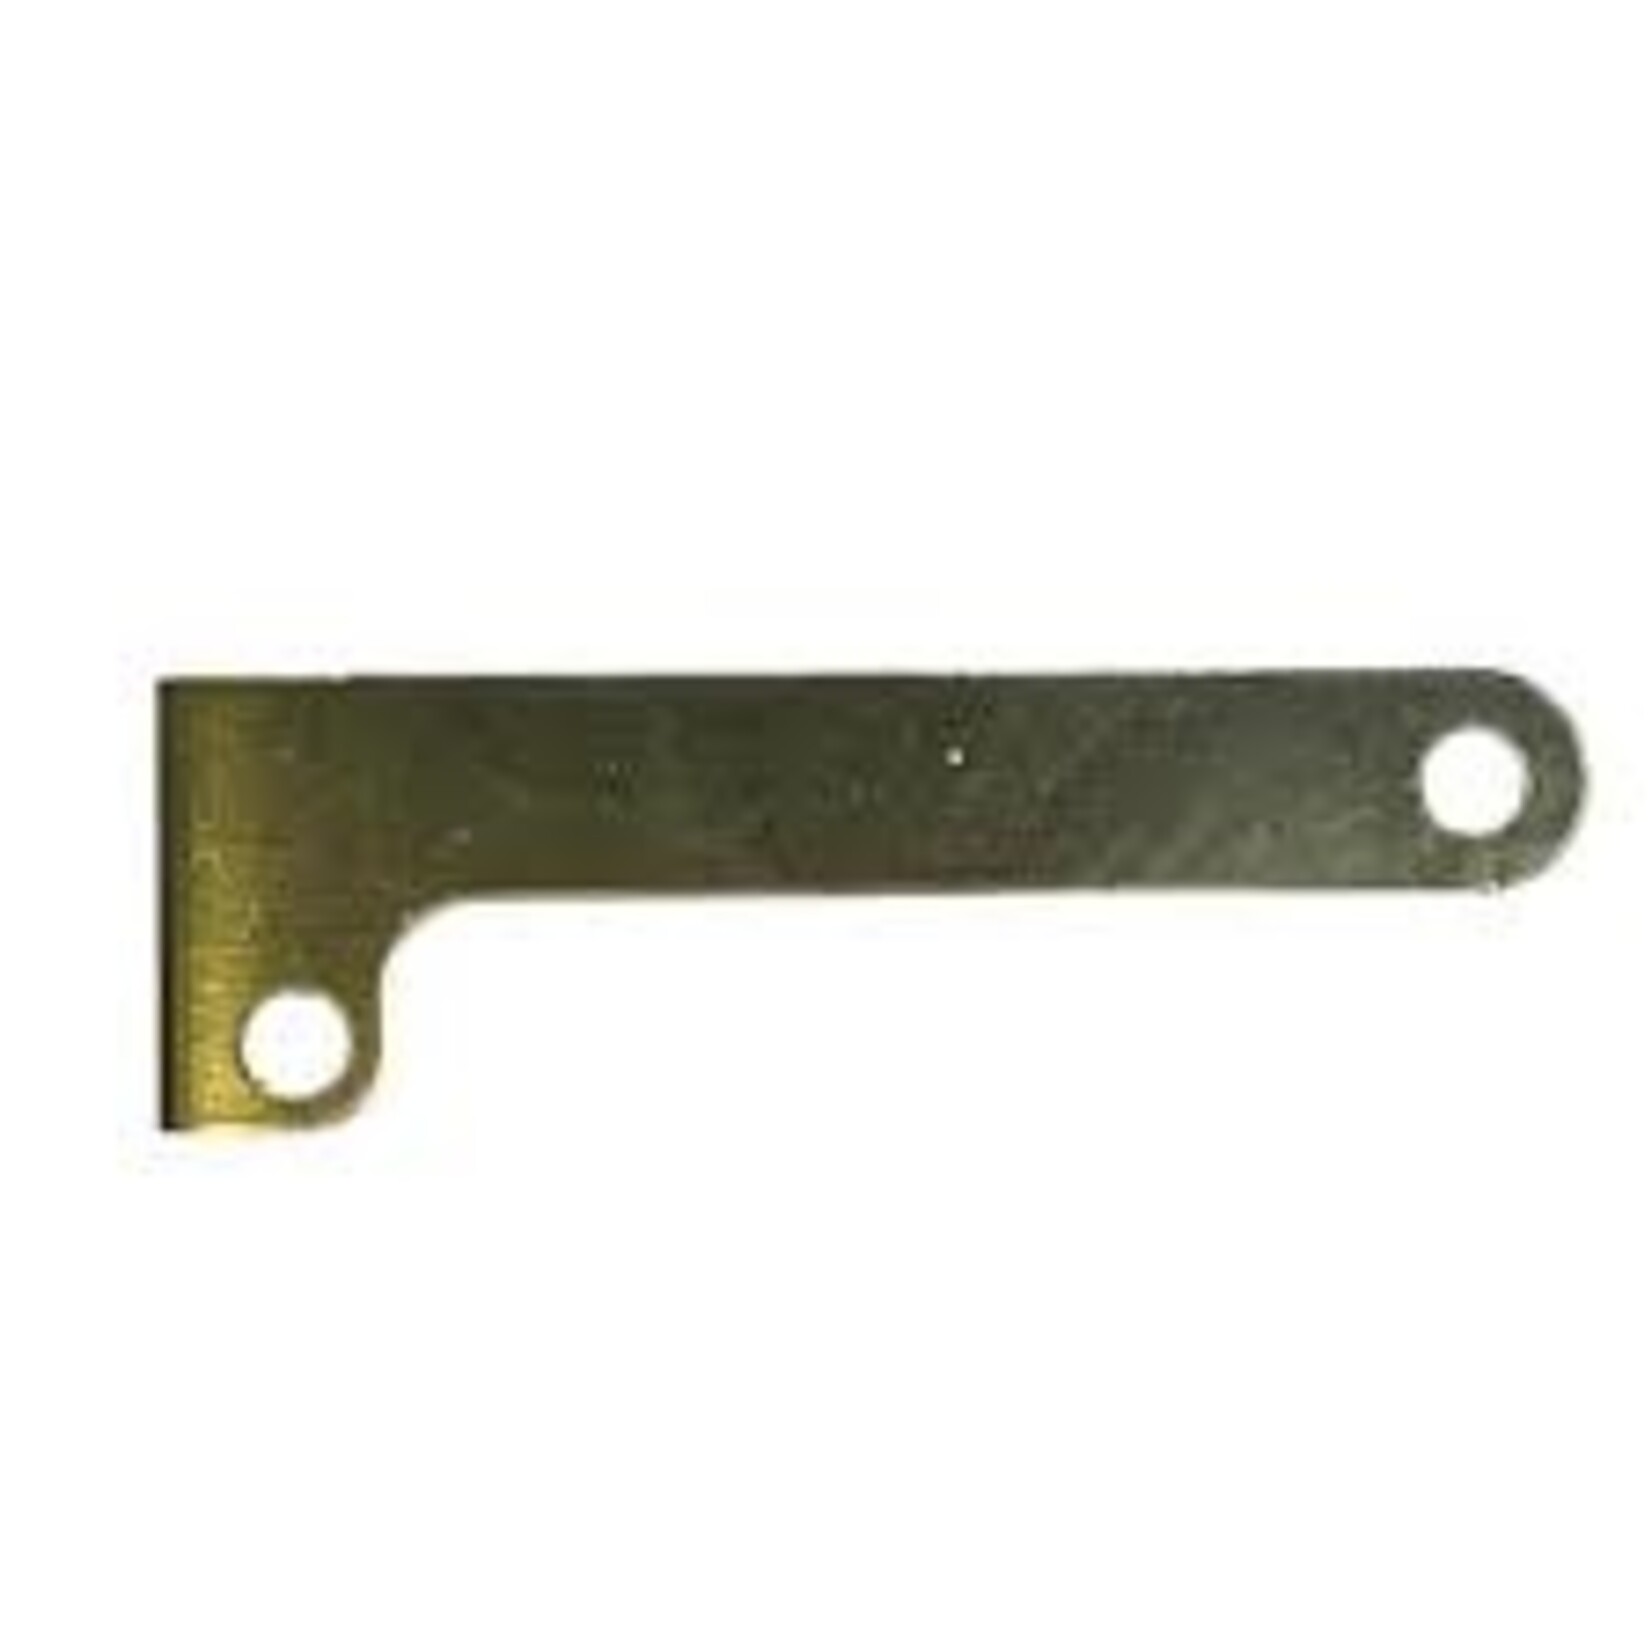 Apple FRONT CAMERA FLEX CABLE HOLDING BRACKET COMPATIBLE FOR IPHONE XR (ON MOTHERBOARD)